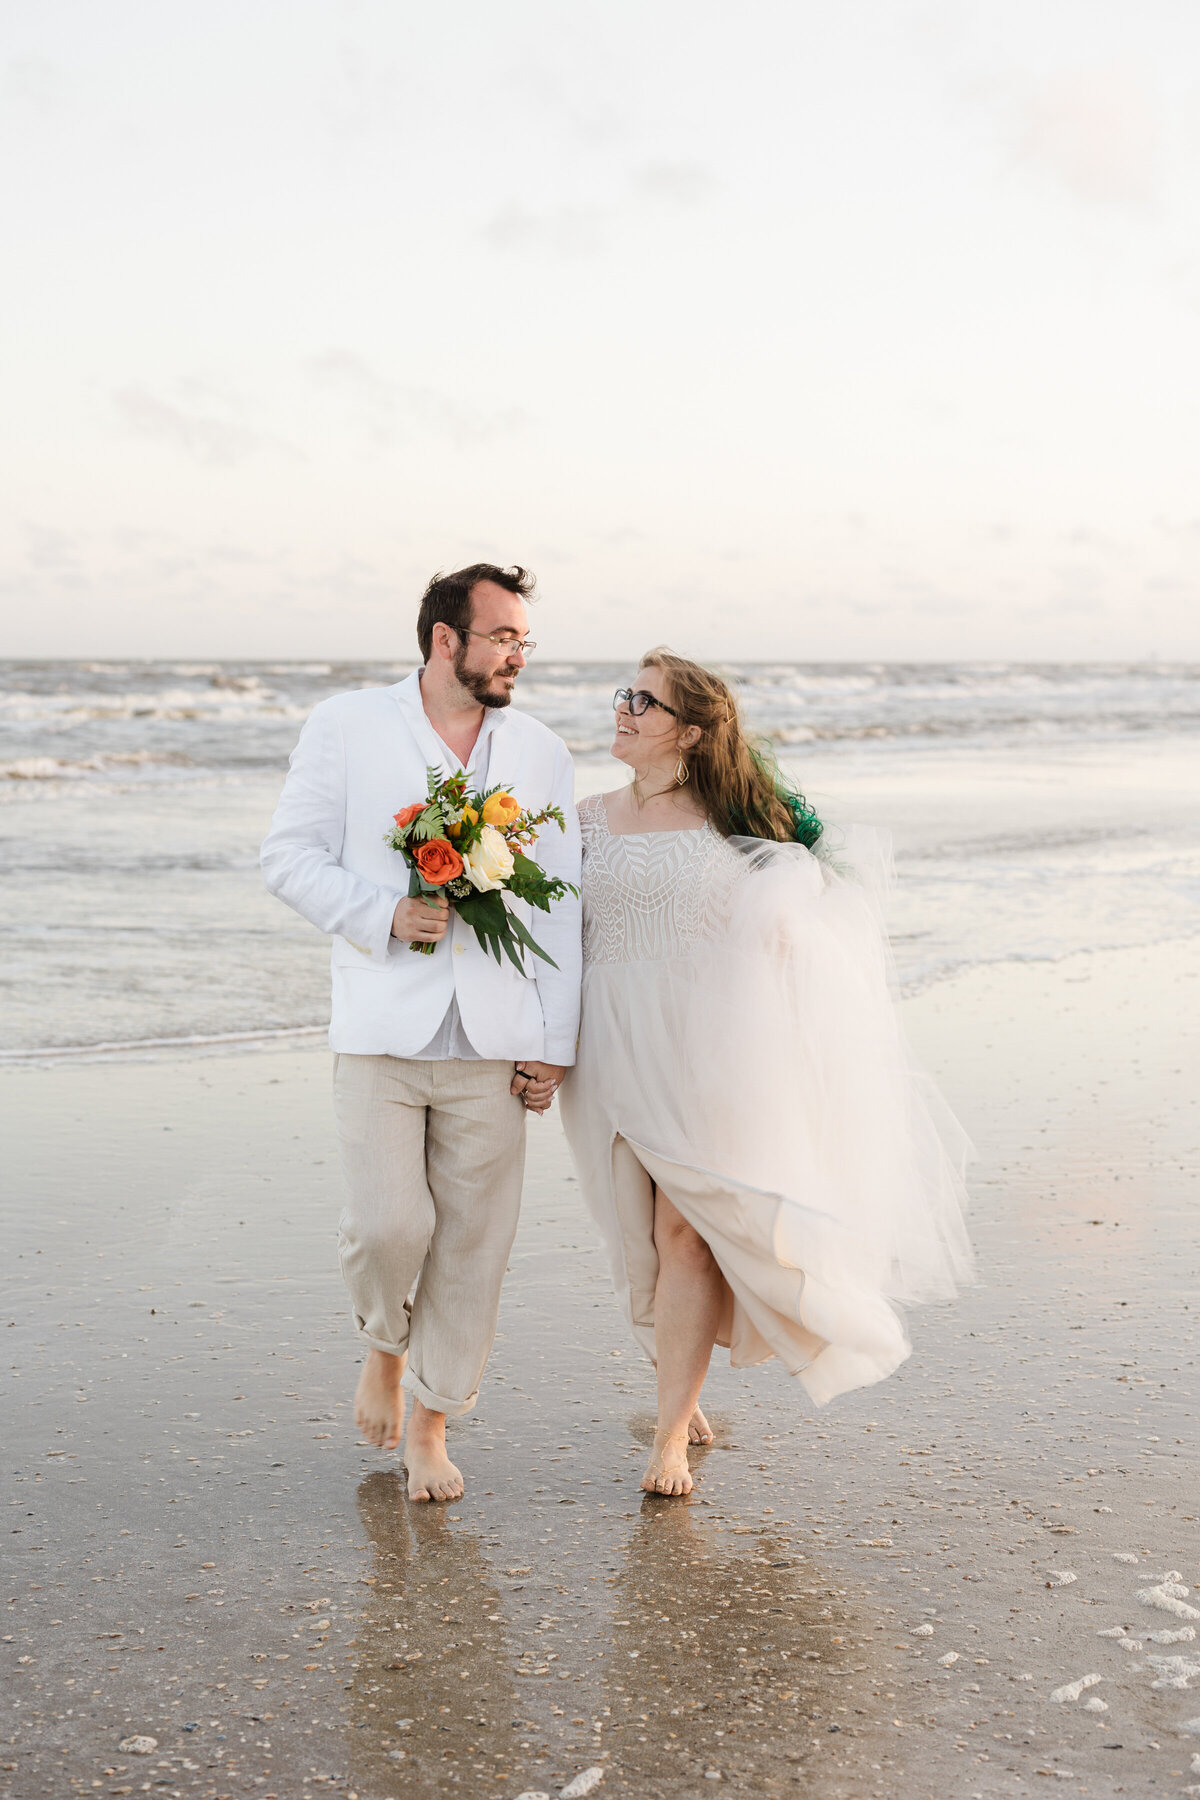 Portrait of a bride and groom walking along the beach and looking longingly at each other after their wedding ceremony on the beach in Crystal Beach, Texas. The bride is on the right and is wearing a detailed flowing white dress with green highlights in her hair. The groom is on the left and is wearing a white jacket and khaki pants while holding the bride's bouquet. They both are wearing glasses and are backed by the ocean.